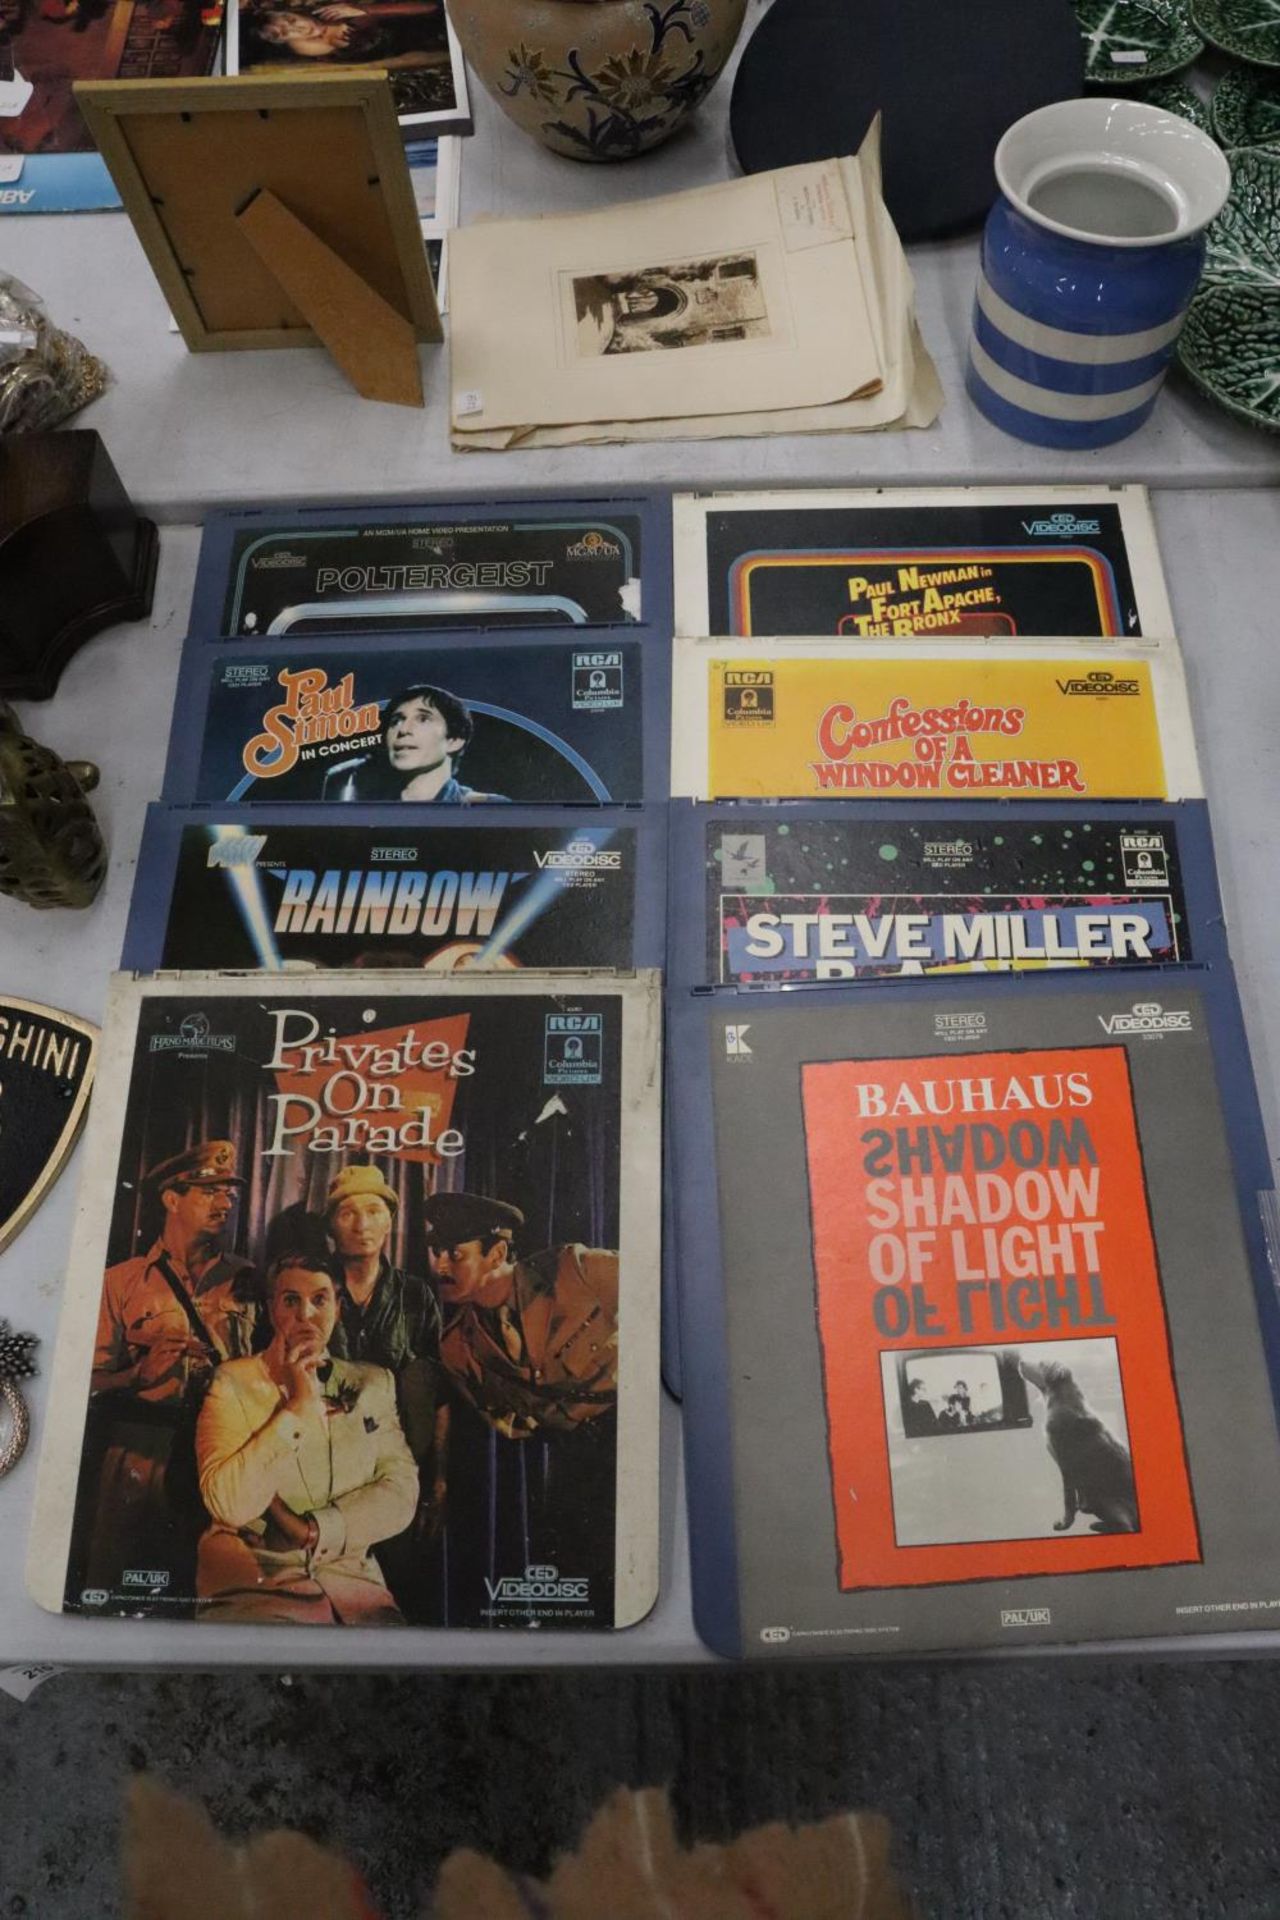 A COLLECTION OF VINTAGE VIDEO DISCS TO INCLUDE POLTERGEIST, BAUHAUS, SHADOW OF LIGHT, PAUL SIMON